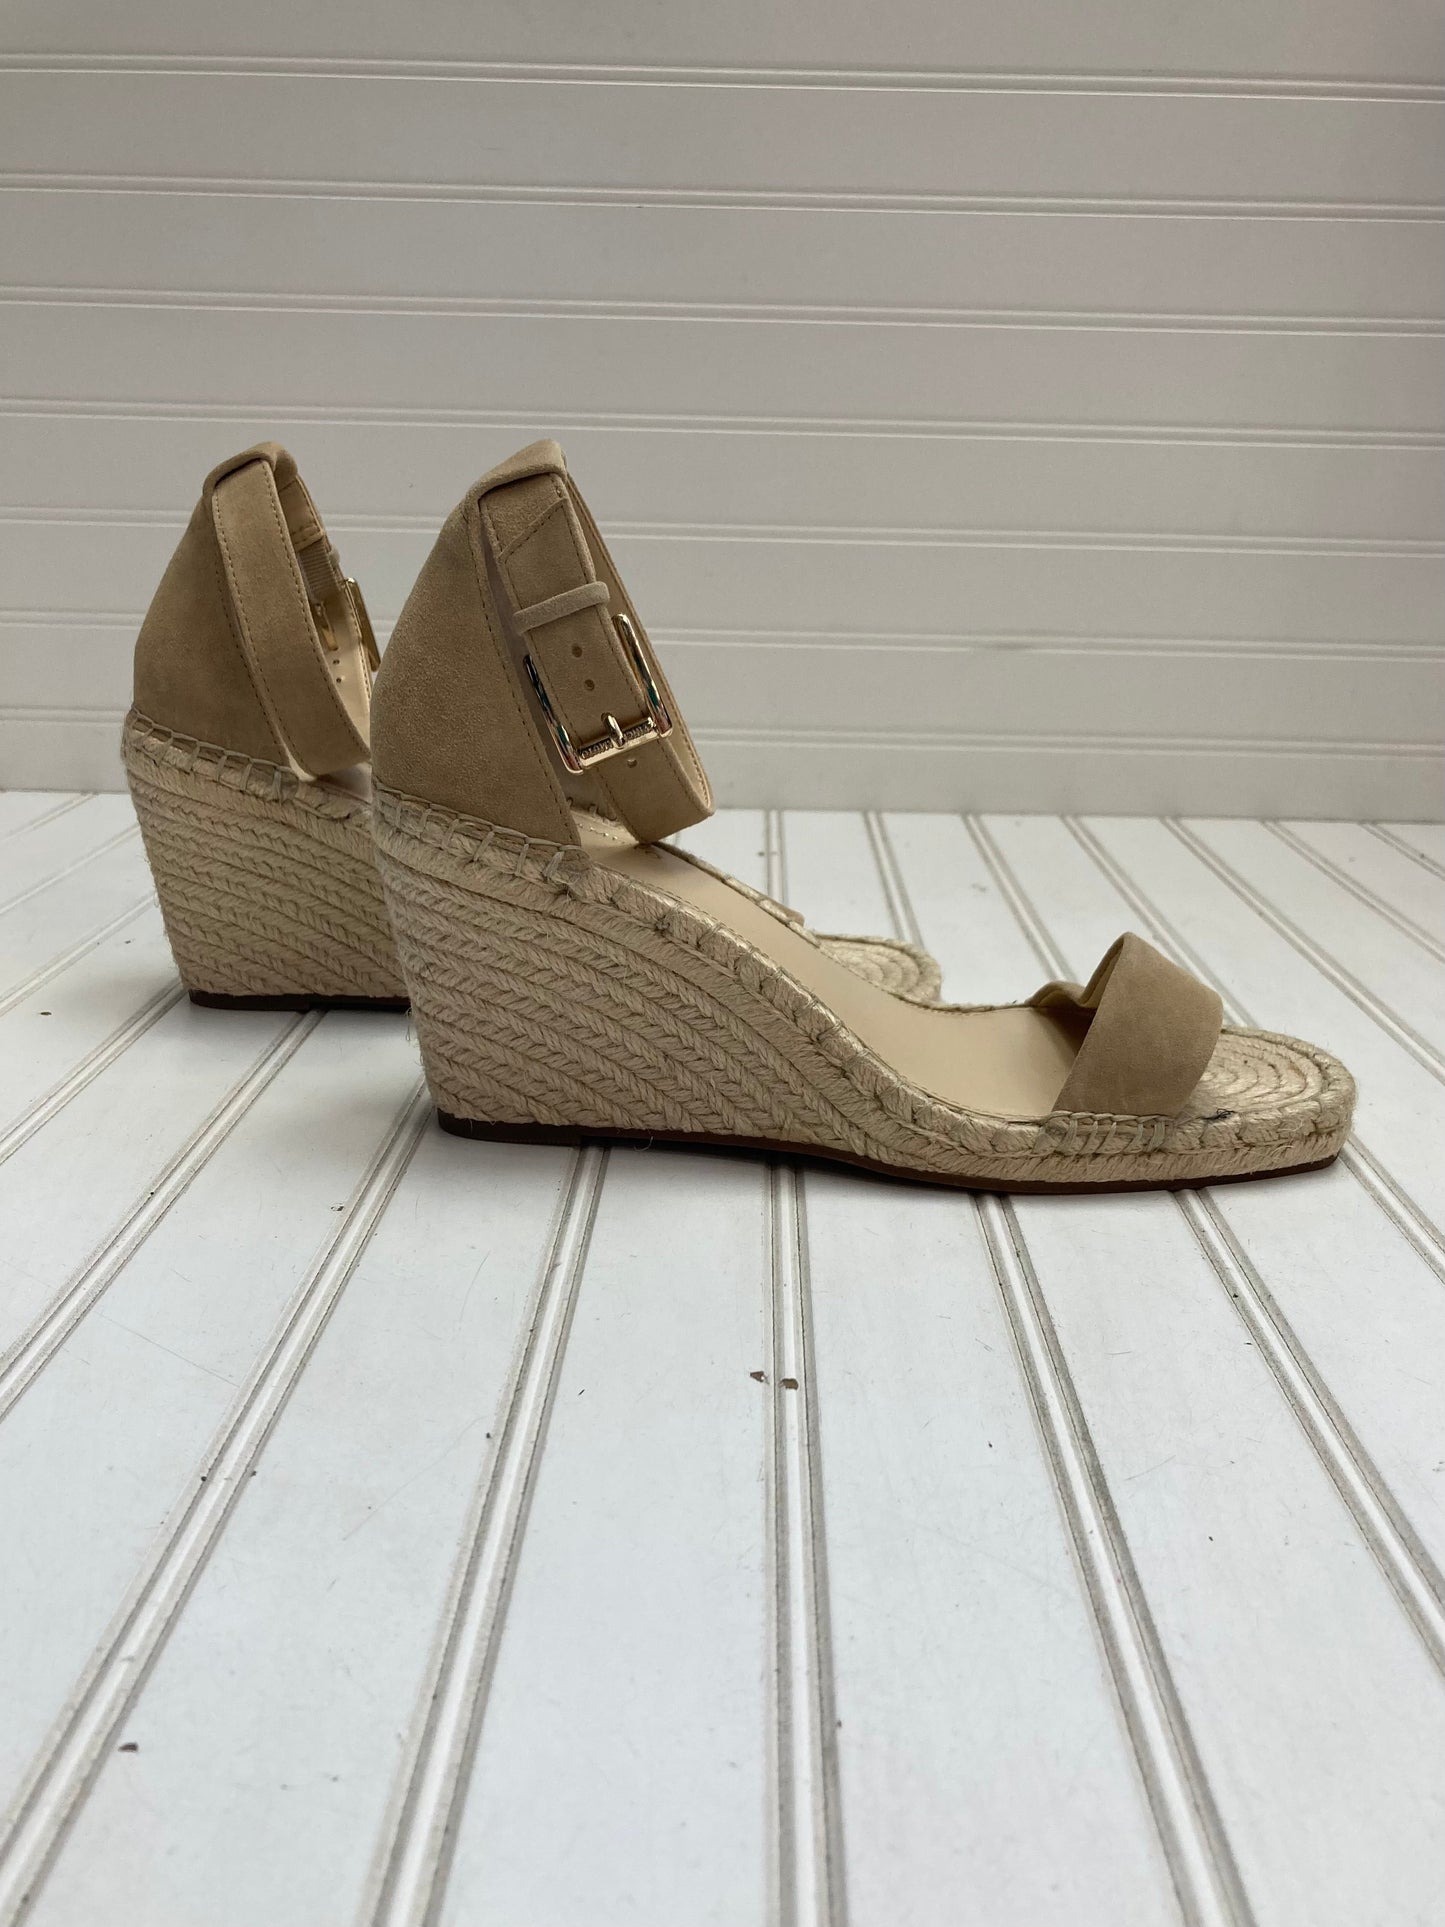 Tan Sandals Heels Wedge Vince Camuto, Size 11